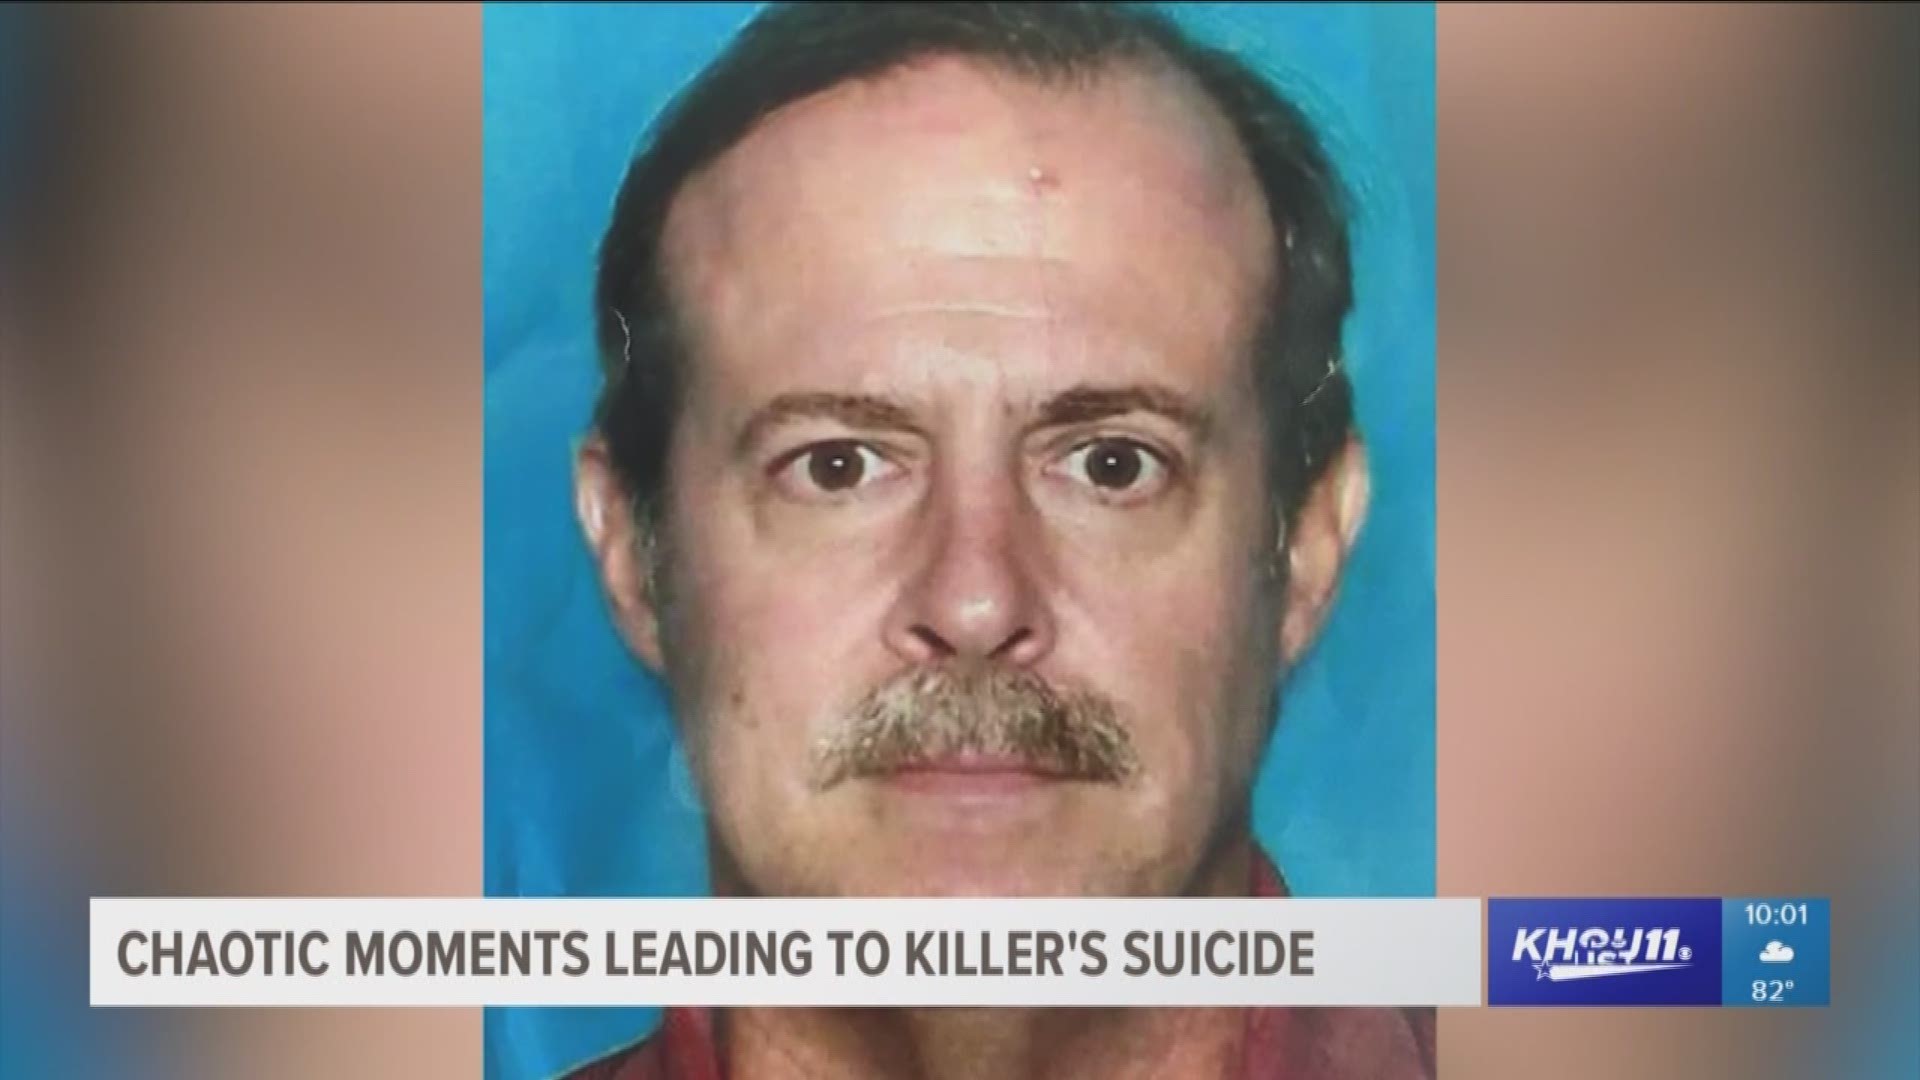 Phone calls from officers on the scene reveal the chaotic moments leading up to the suicide of Joseph Pappas, the man accused of killing Dr. Mark Hausknecht.